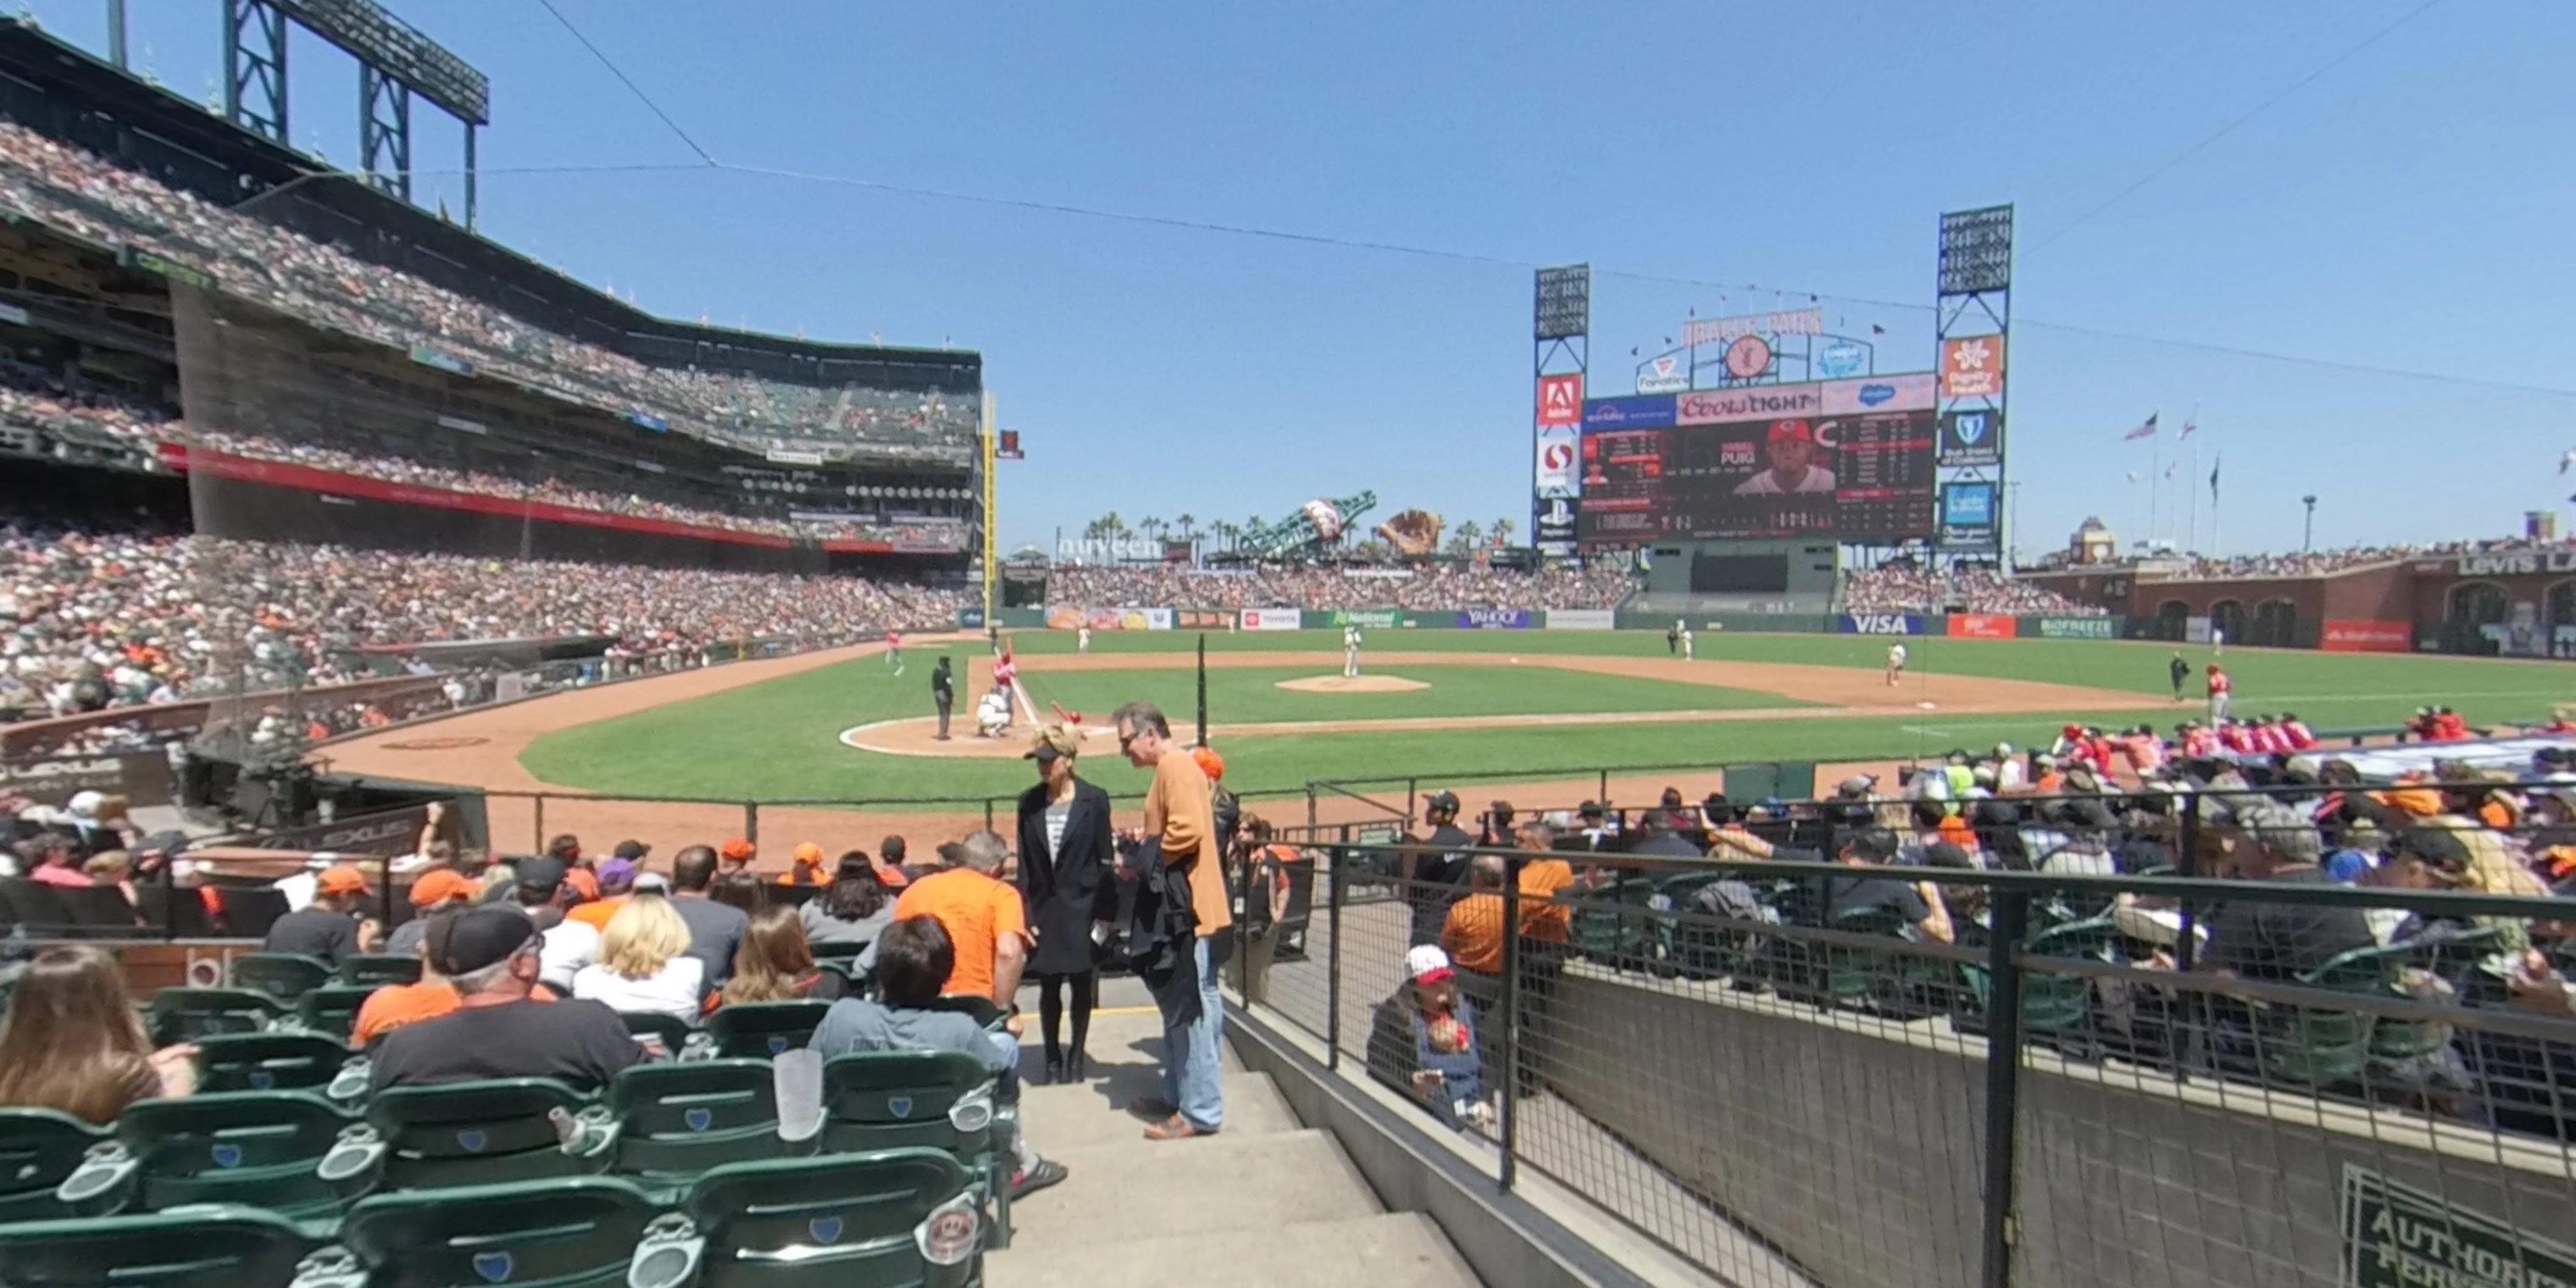 Section 112 at Oracle Park 